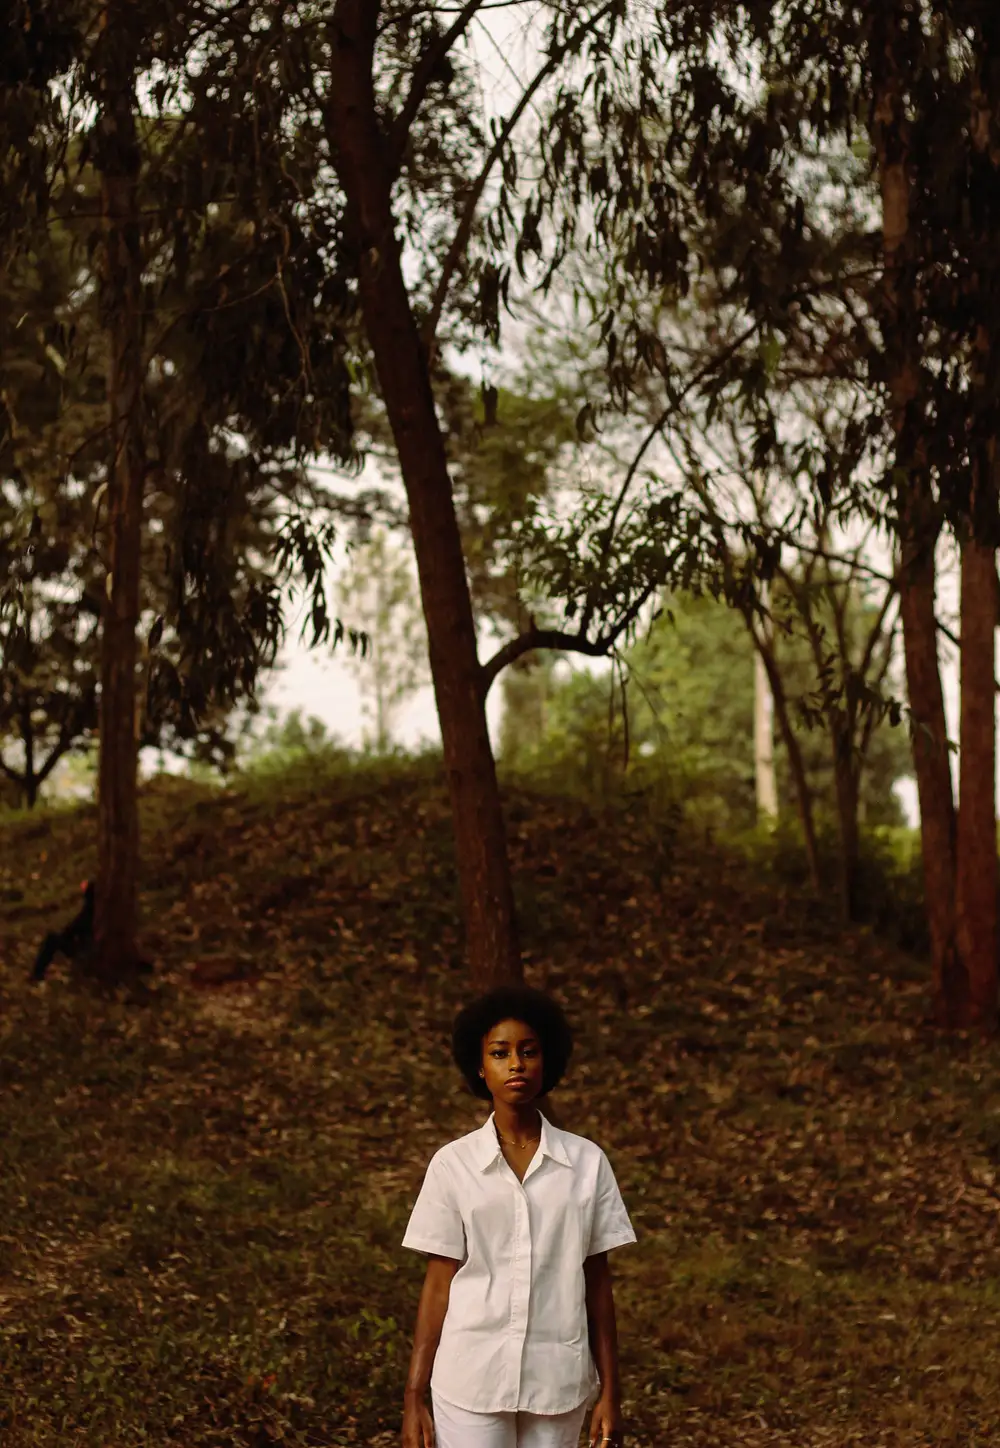 A Woman in White Button Down Shirt Standing Near Tall Trees in the Forest